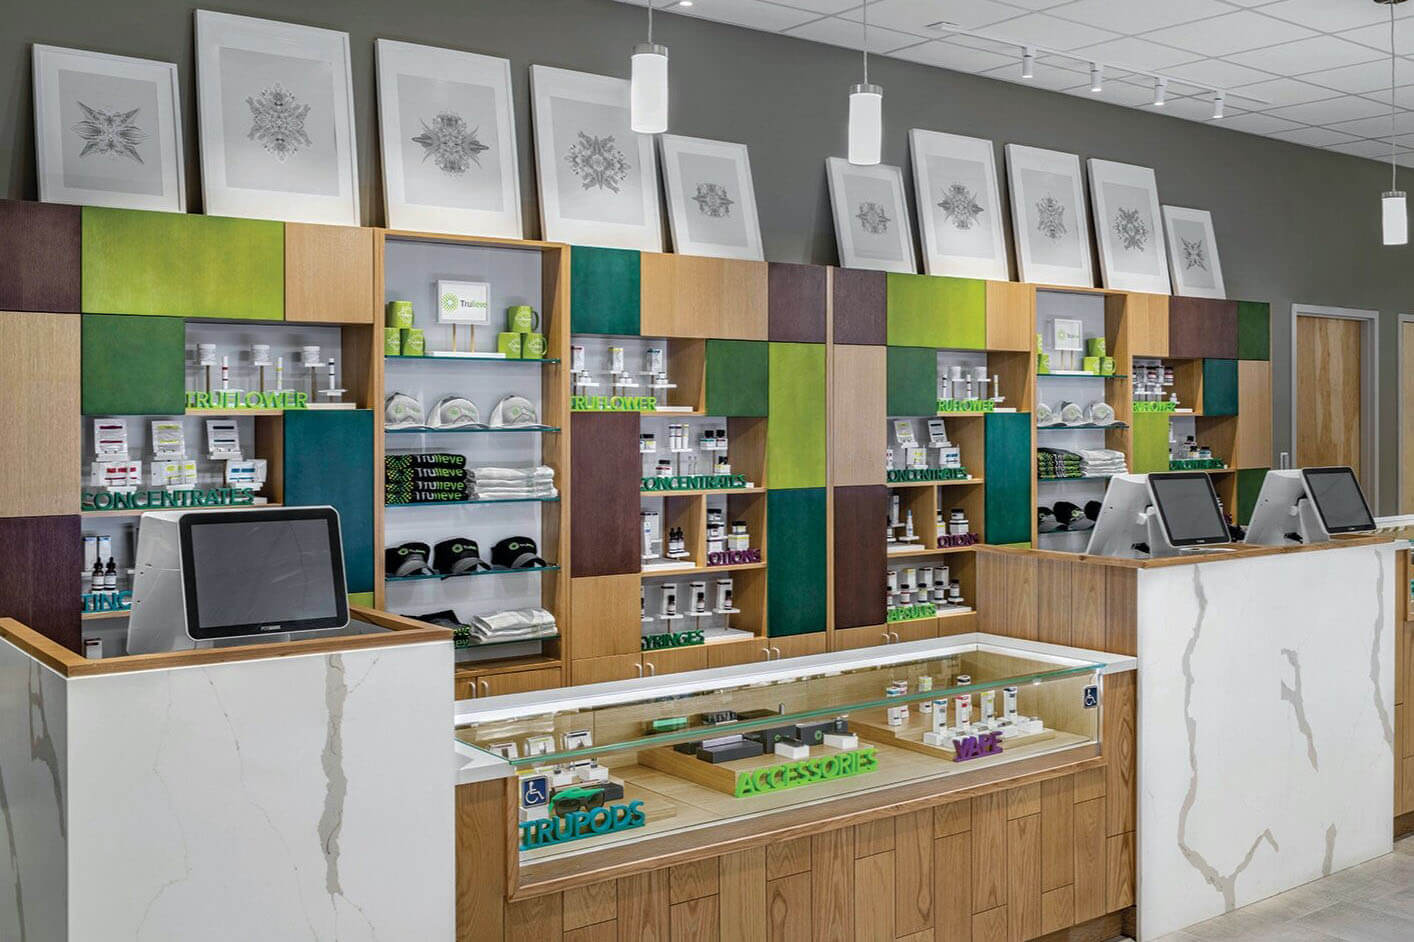 Interior of a new Trulieve cannabis store, showing all-natural design of green shaded walls, wooden counters and eco-focused artwork. 